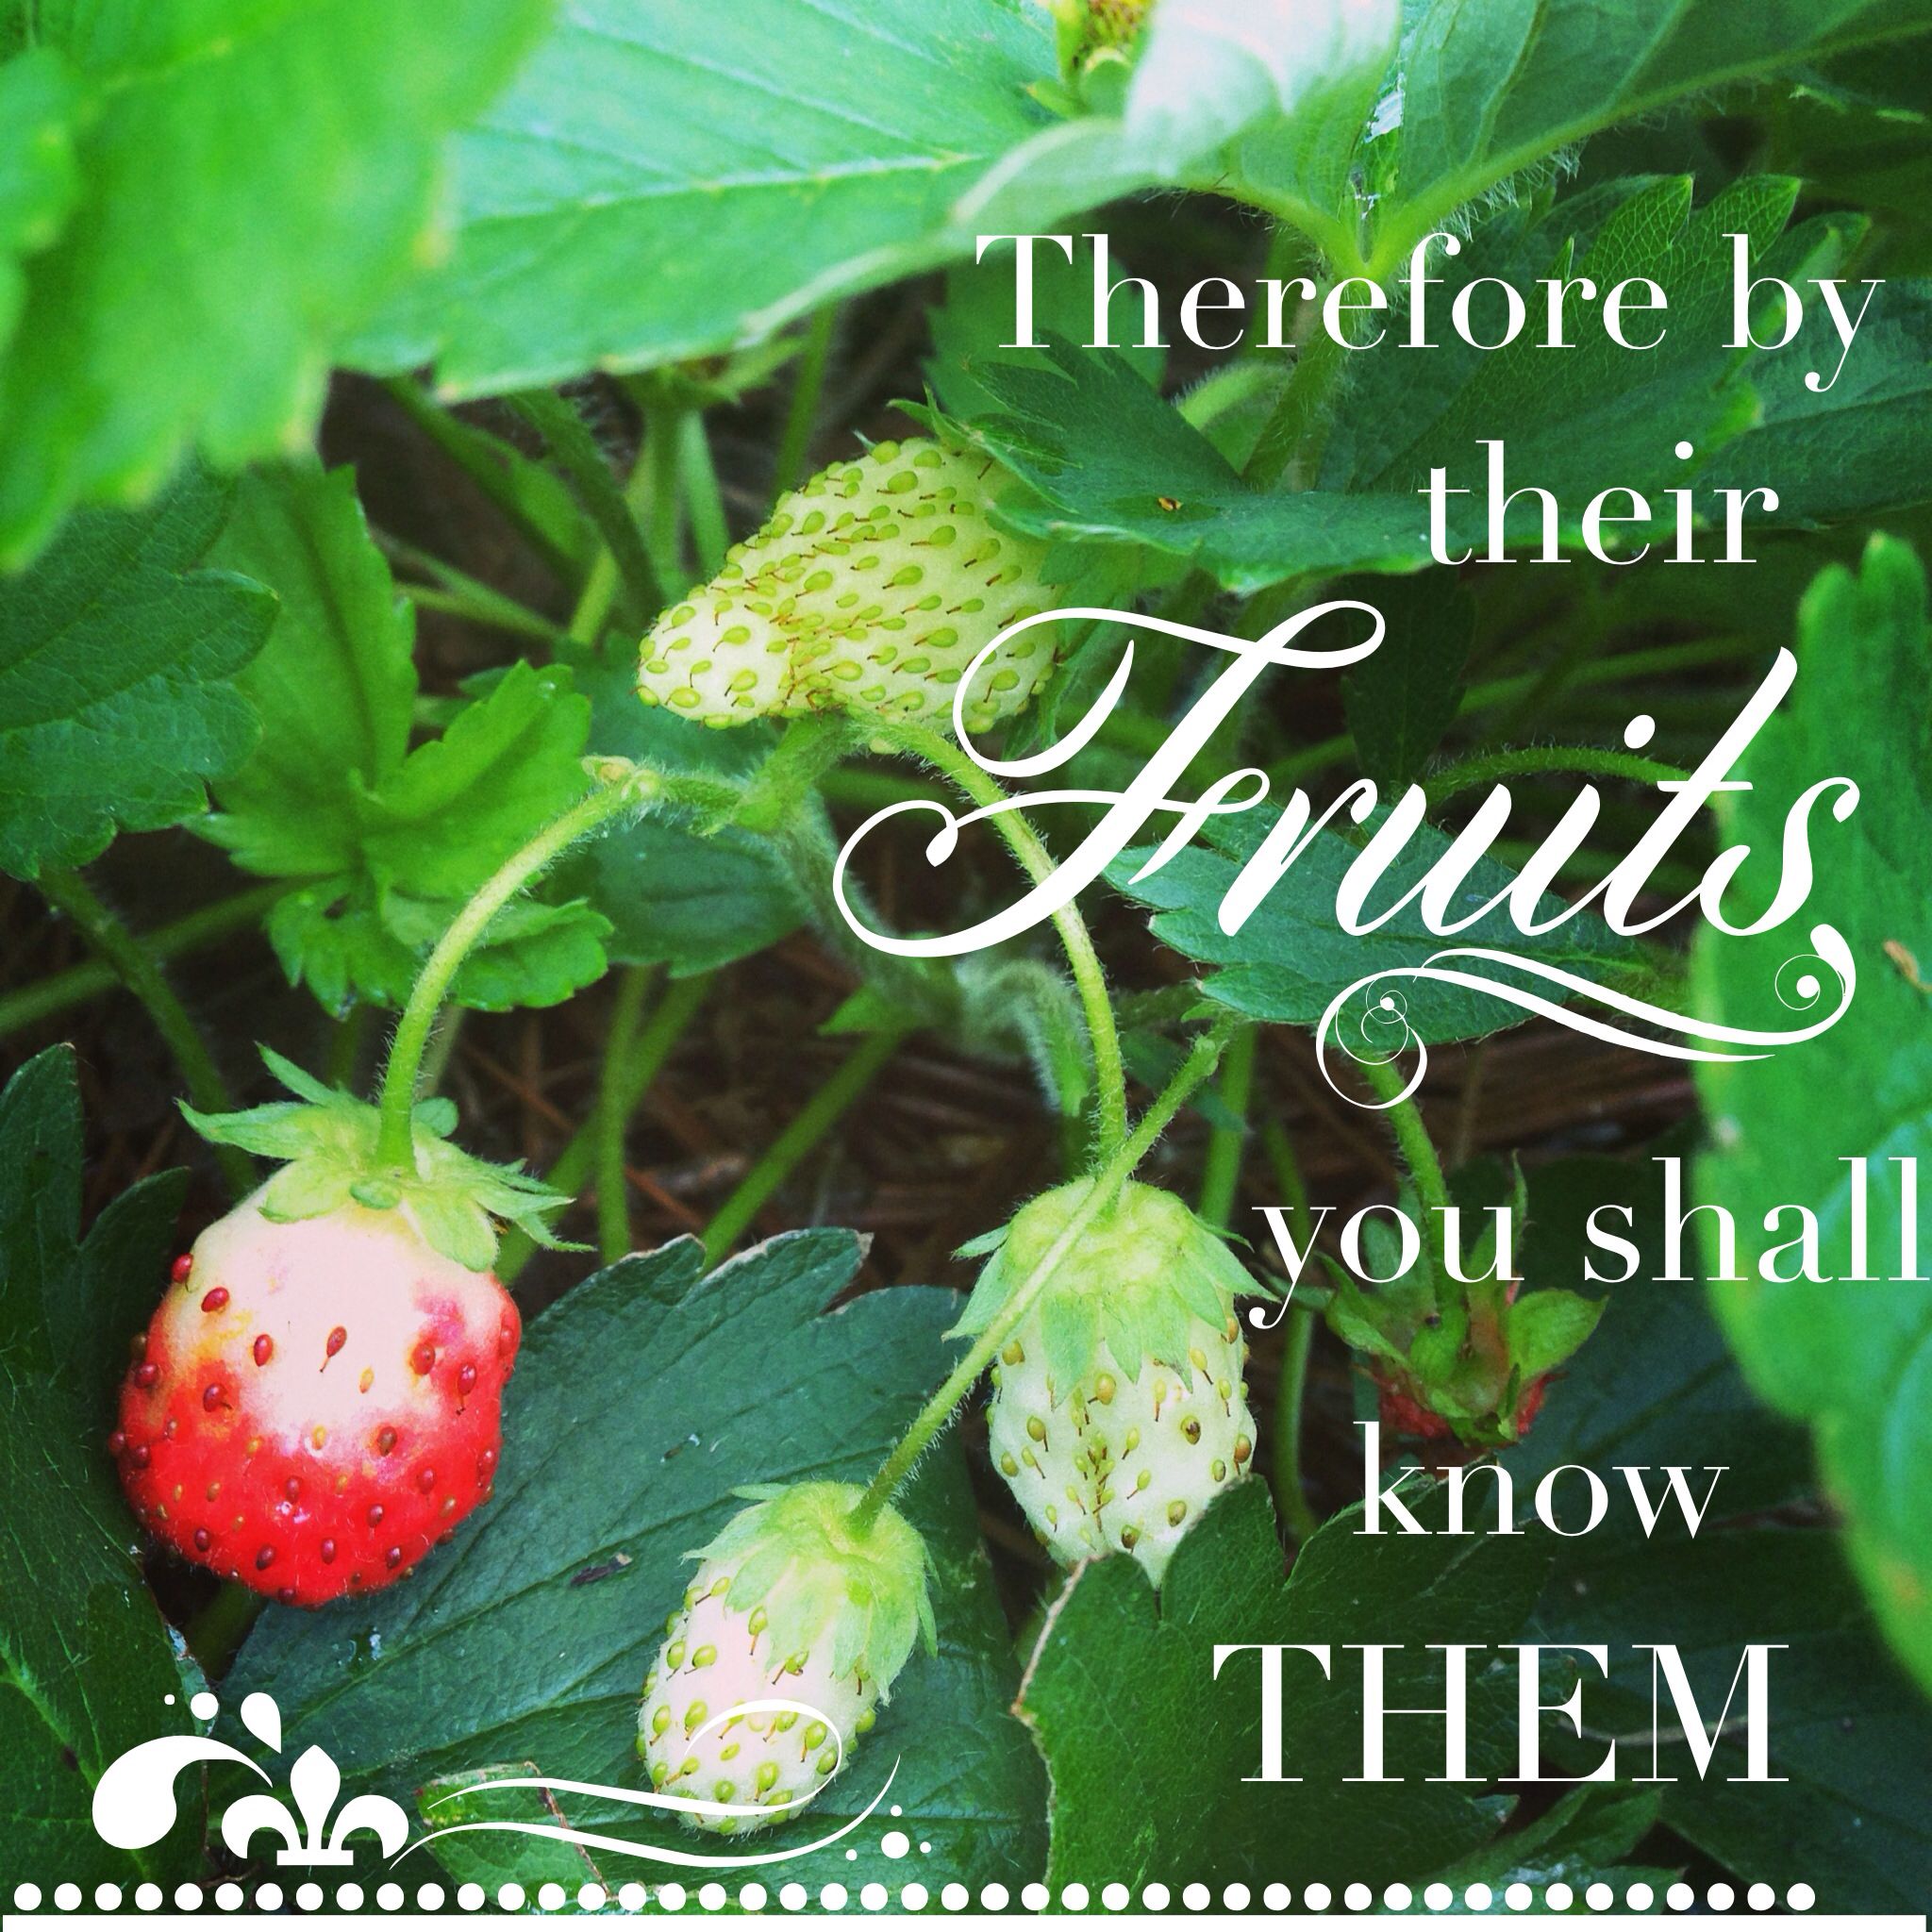 By their fruits you shall tell